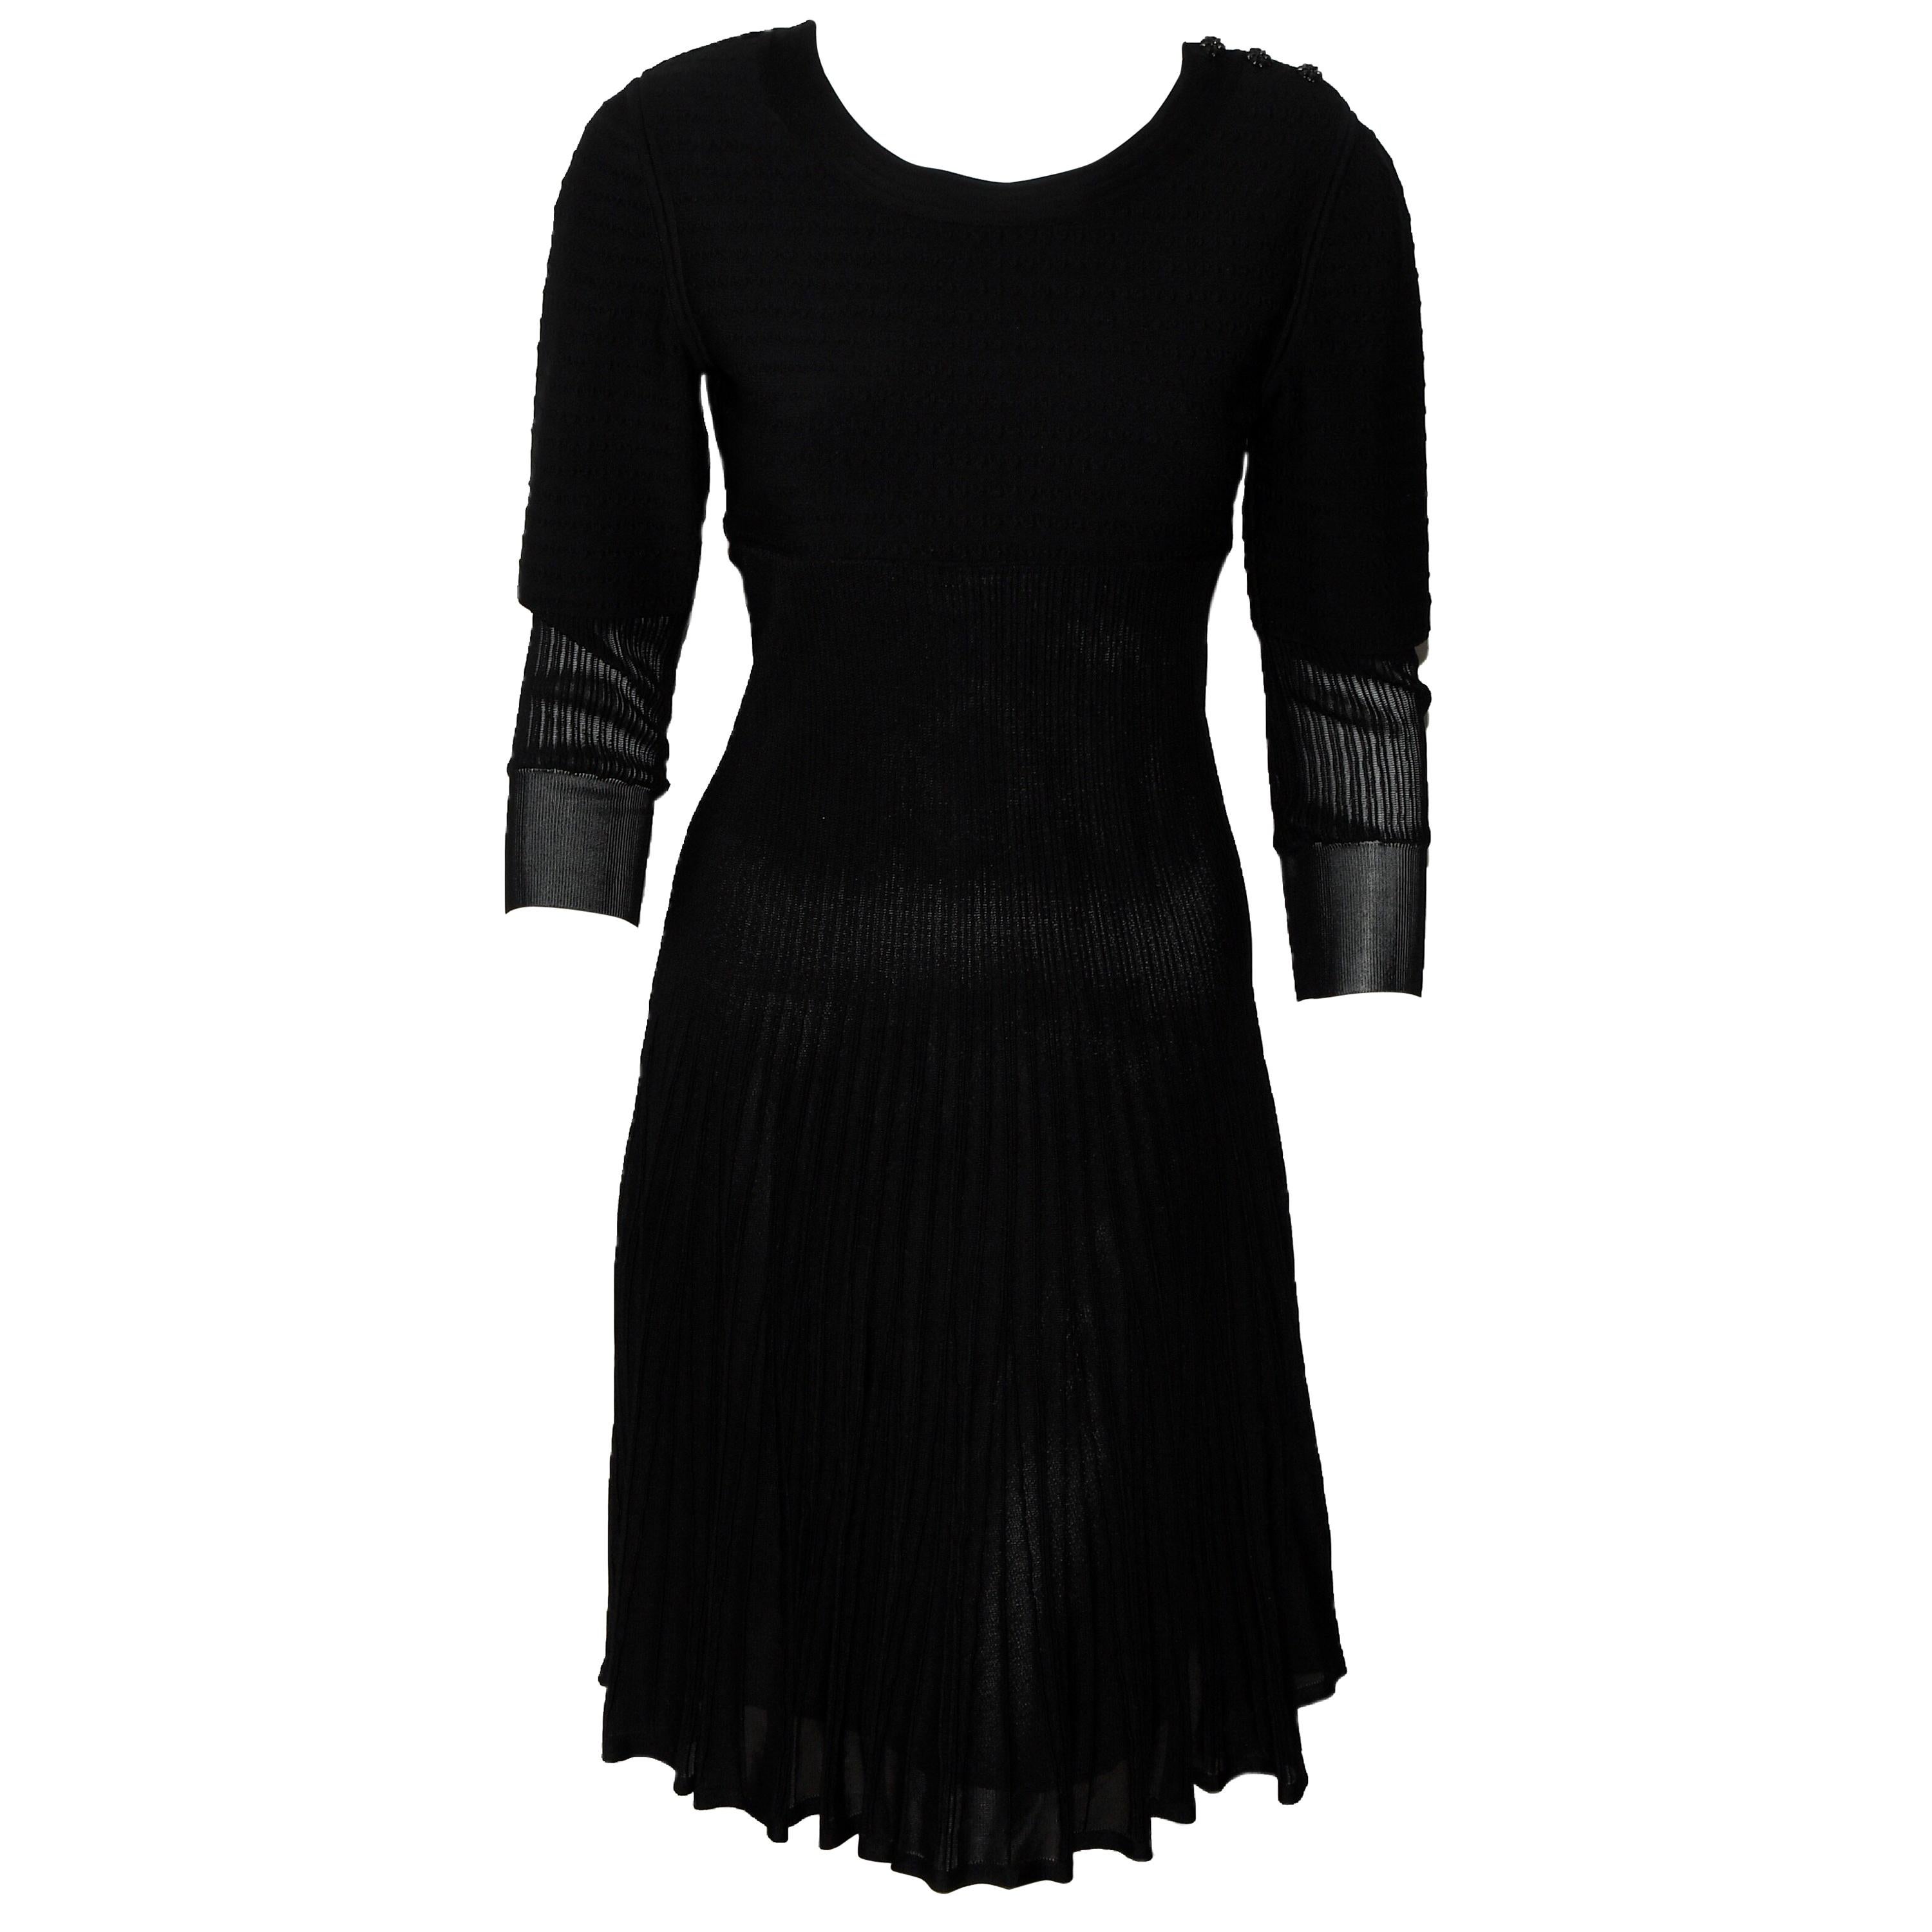 Chanel Black Knit Silk Blend Pleated Long Sleeve Dress 2009 Cruise Collection